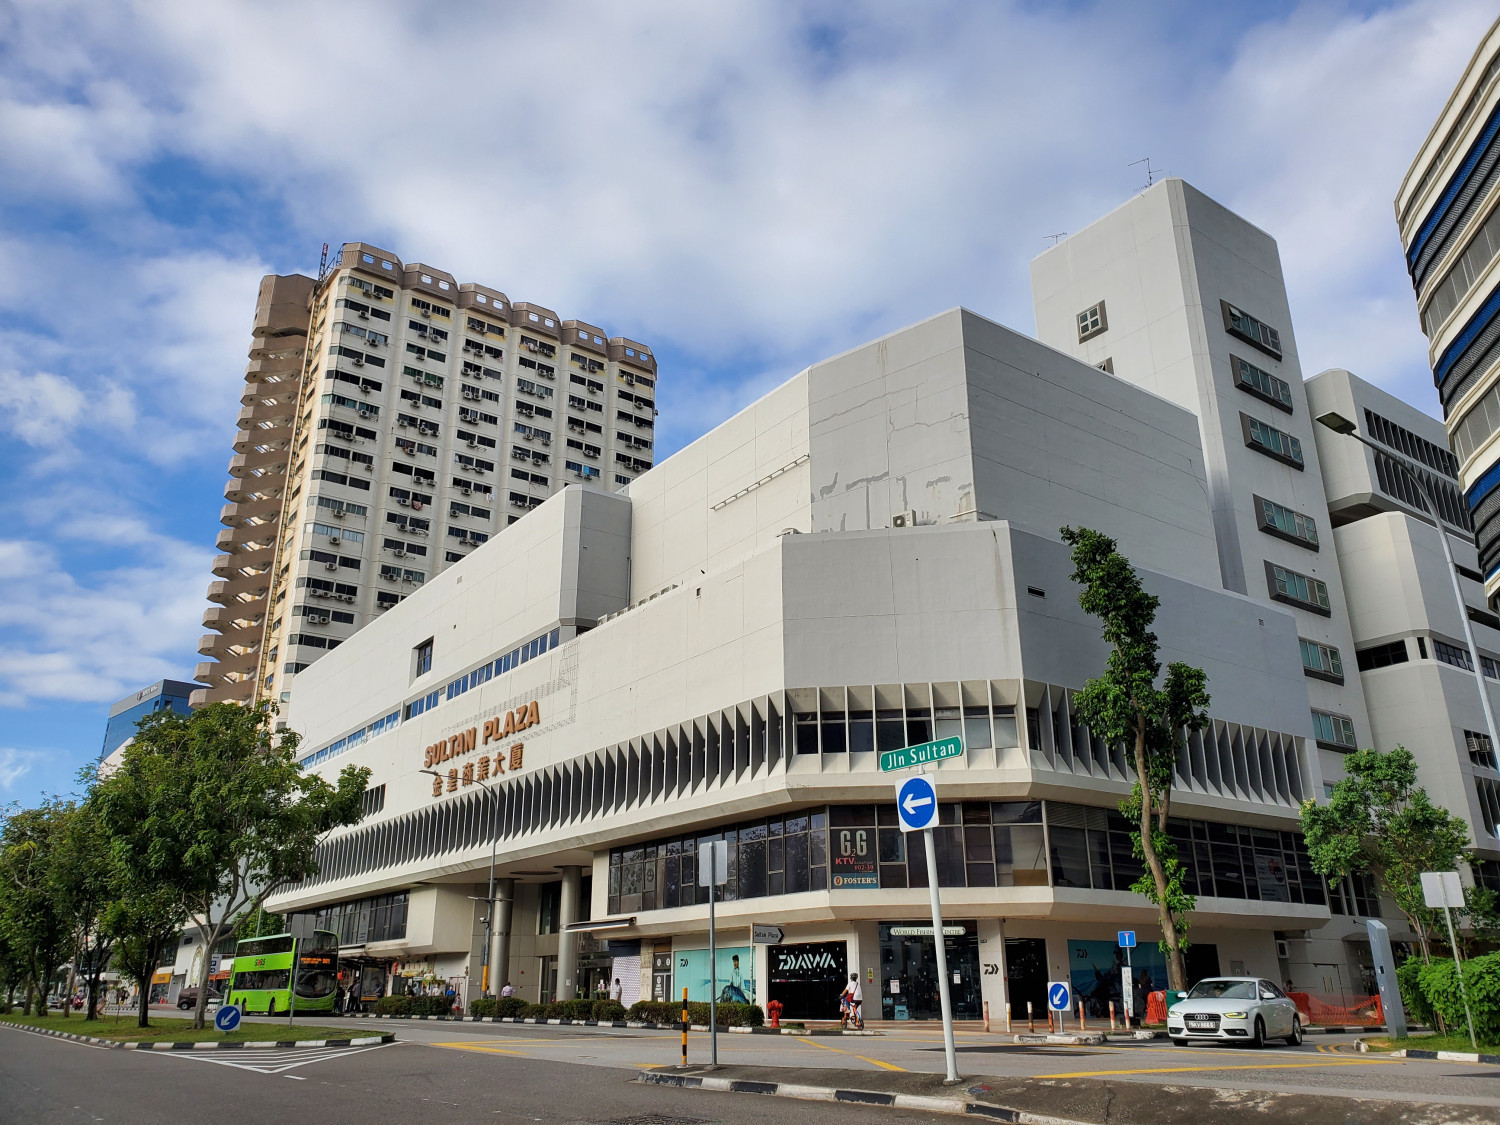 Sultan Plaza collective sale tender to close on Oct 26 - Property News